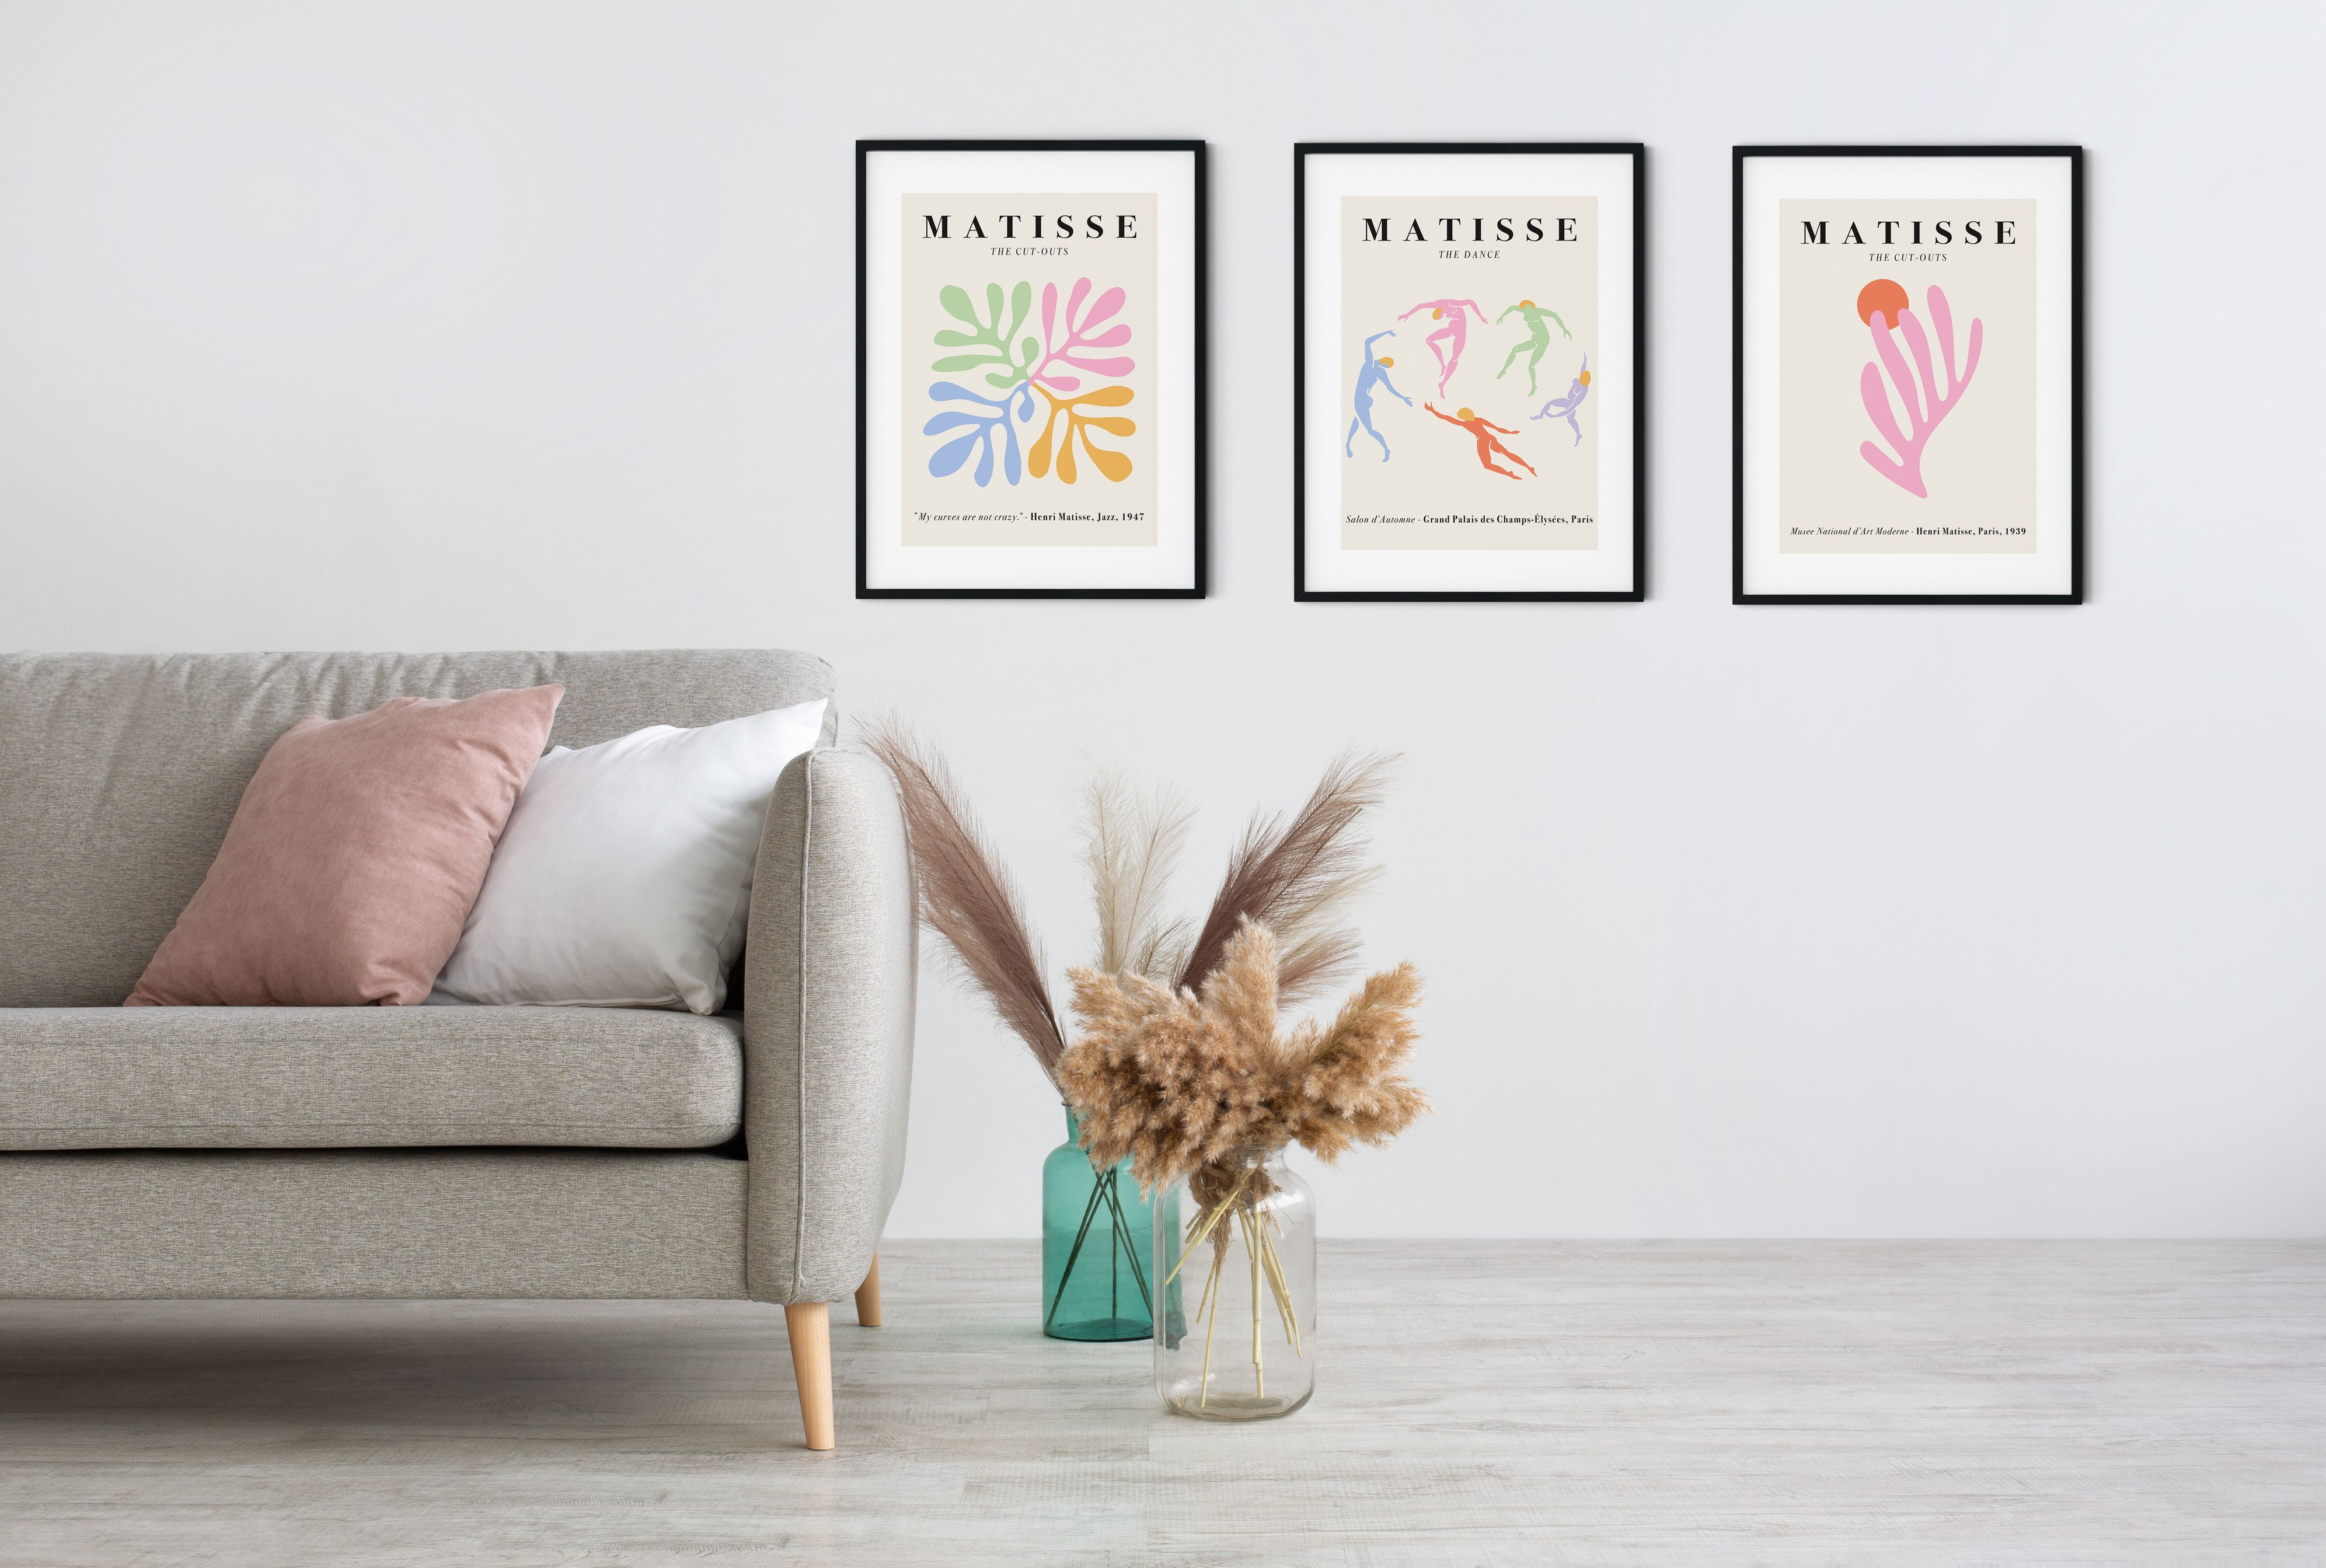  Simplicity Fashion Canvas Wall Art Prints Set of 3,Modern Indie  Danish Pastel Sun Cubes Annulus Aesthetic Poster Funky Art Decorative for  Bedroom Living Room Kitchen Office-16x24 Cool Colorful: Posters & Prints